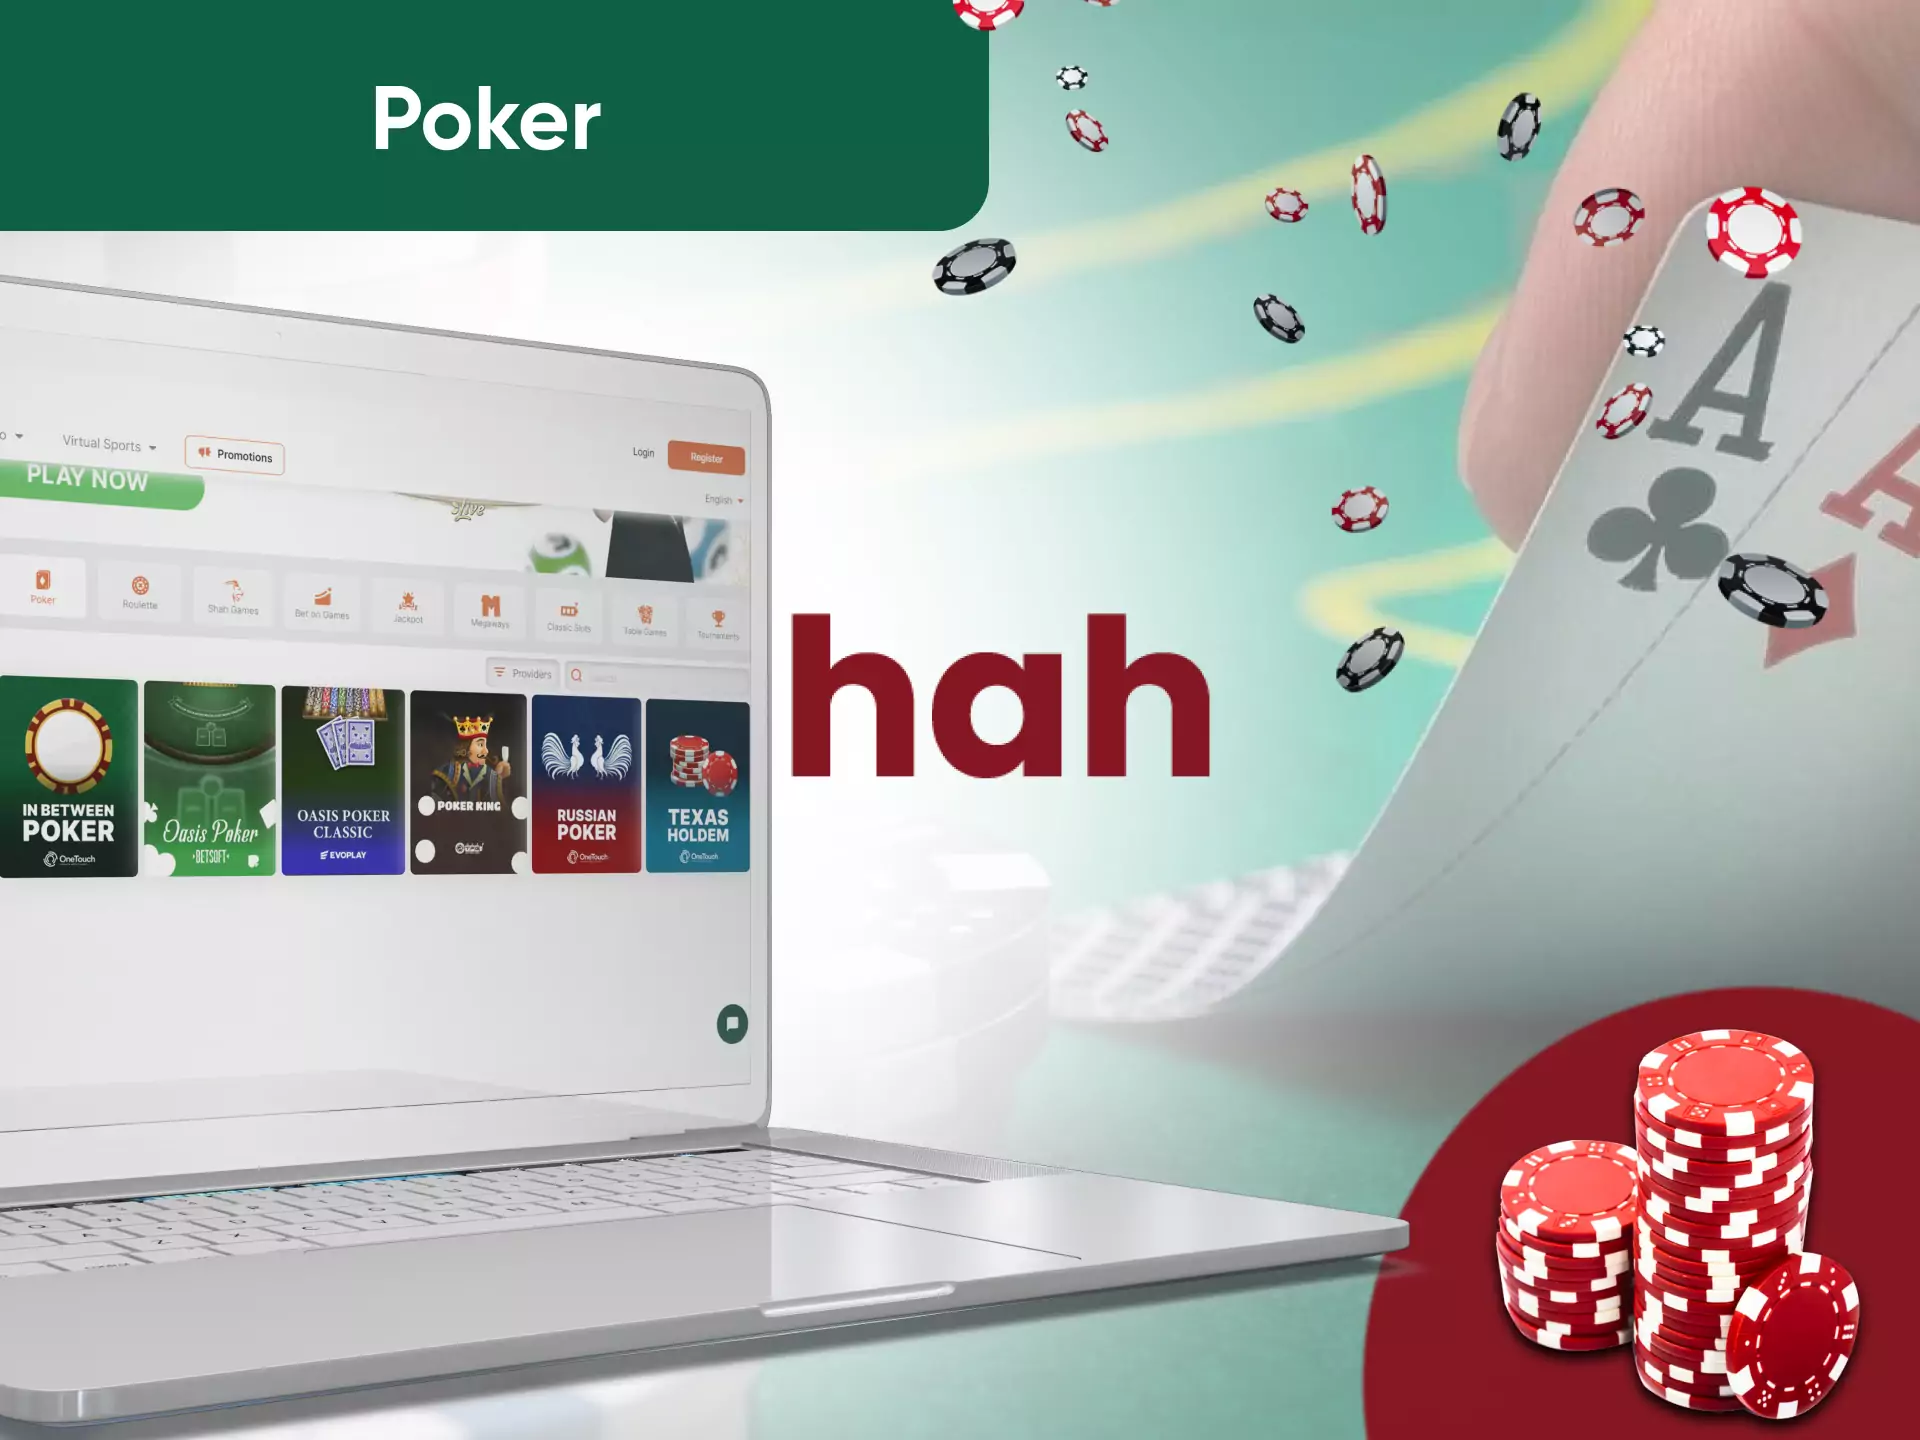 On Betshah, users can play poker with real dealers.